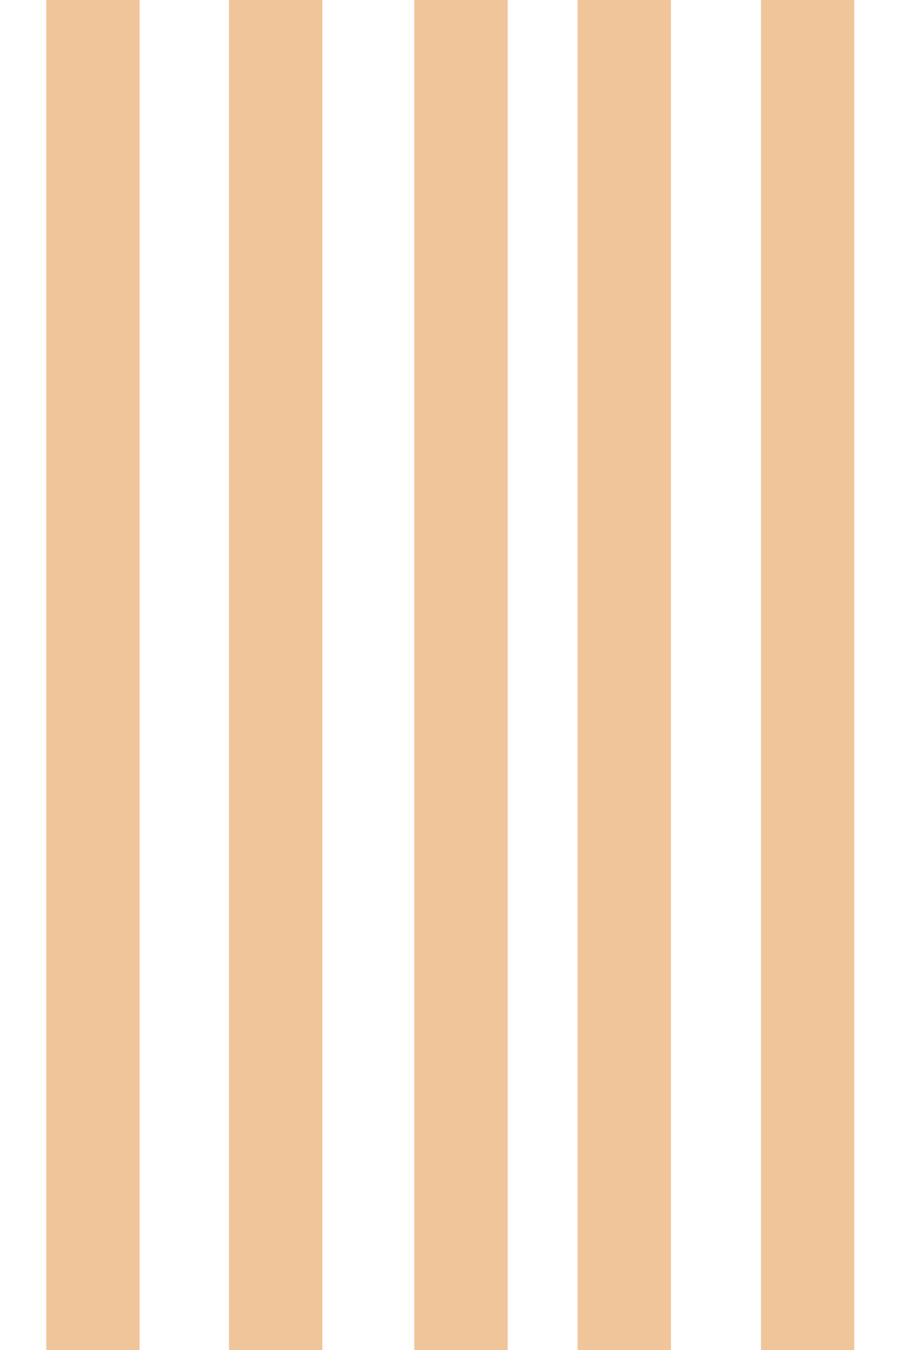 Woolf With Me Fitted Crib Sheet Stripes color_cantaloupe